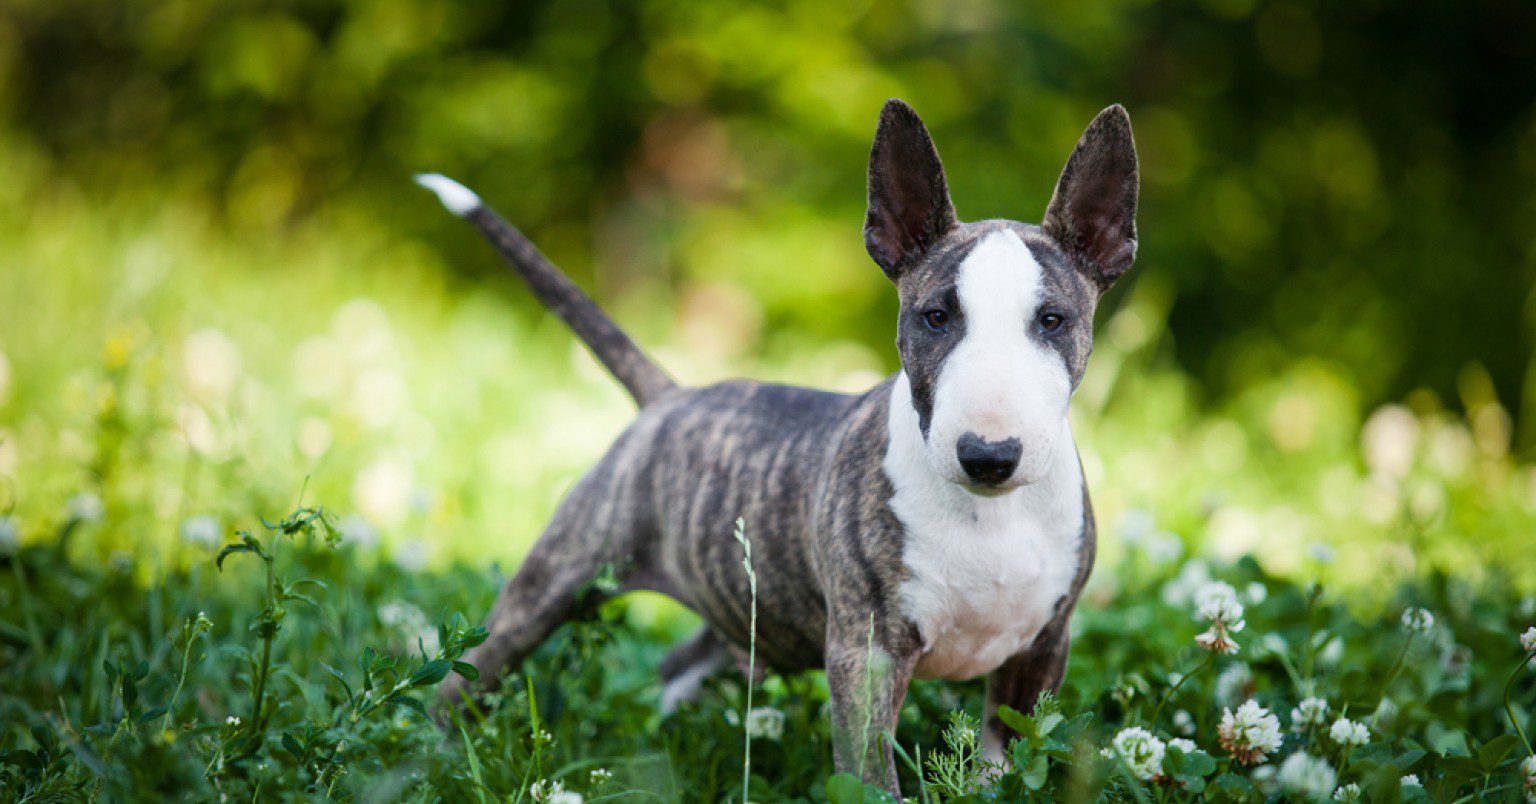 Photograph of a Bull Terrier standing in some wildflowers